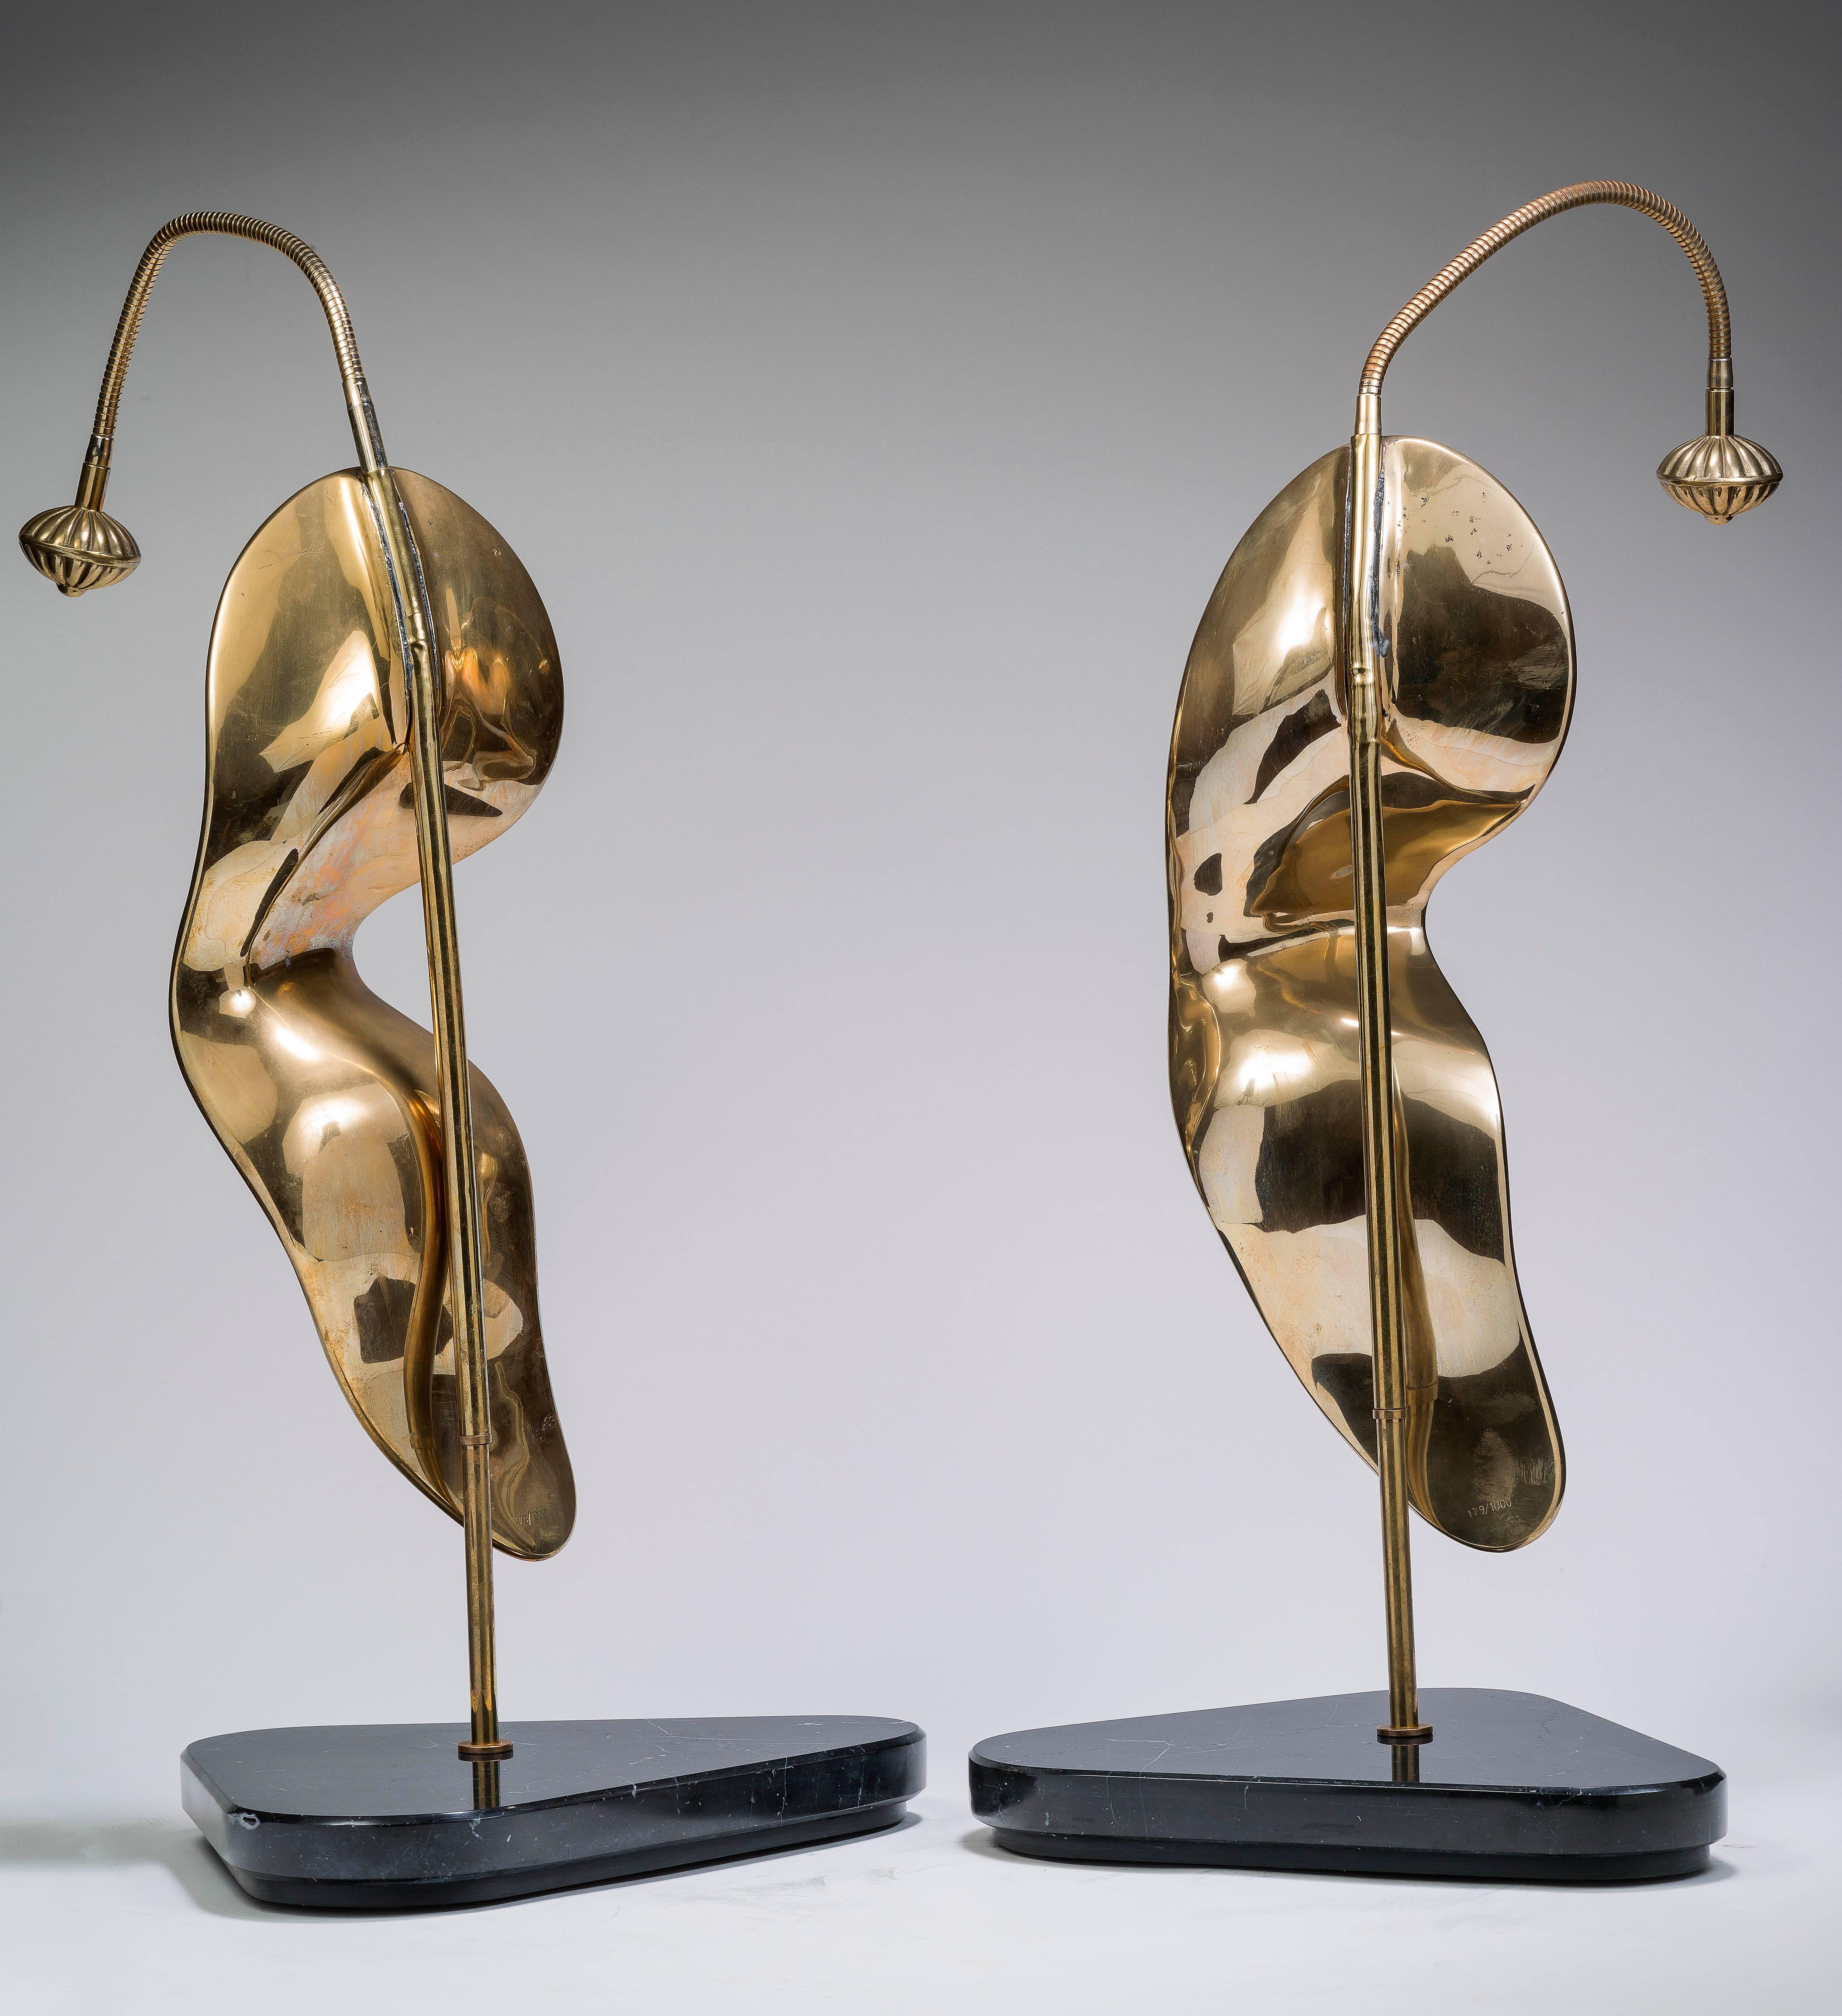 2 Montres Molles (Two The Soft Watches) - Surrealist Sculpture by Salvador Dalí